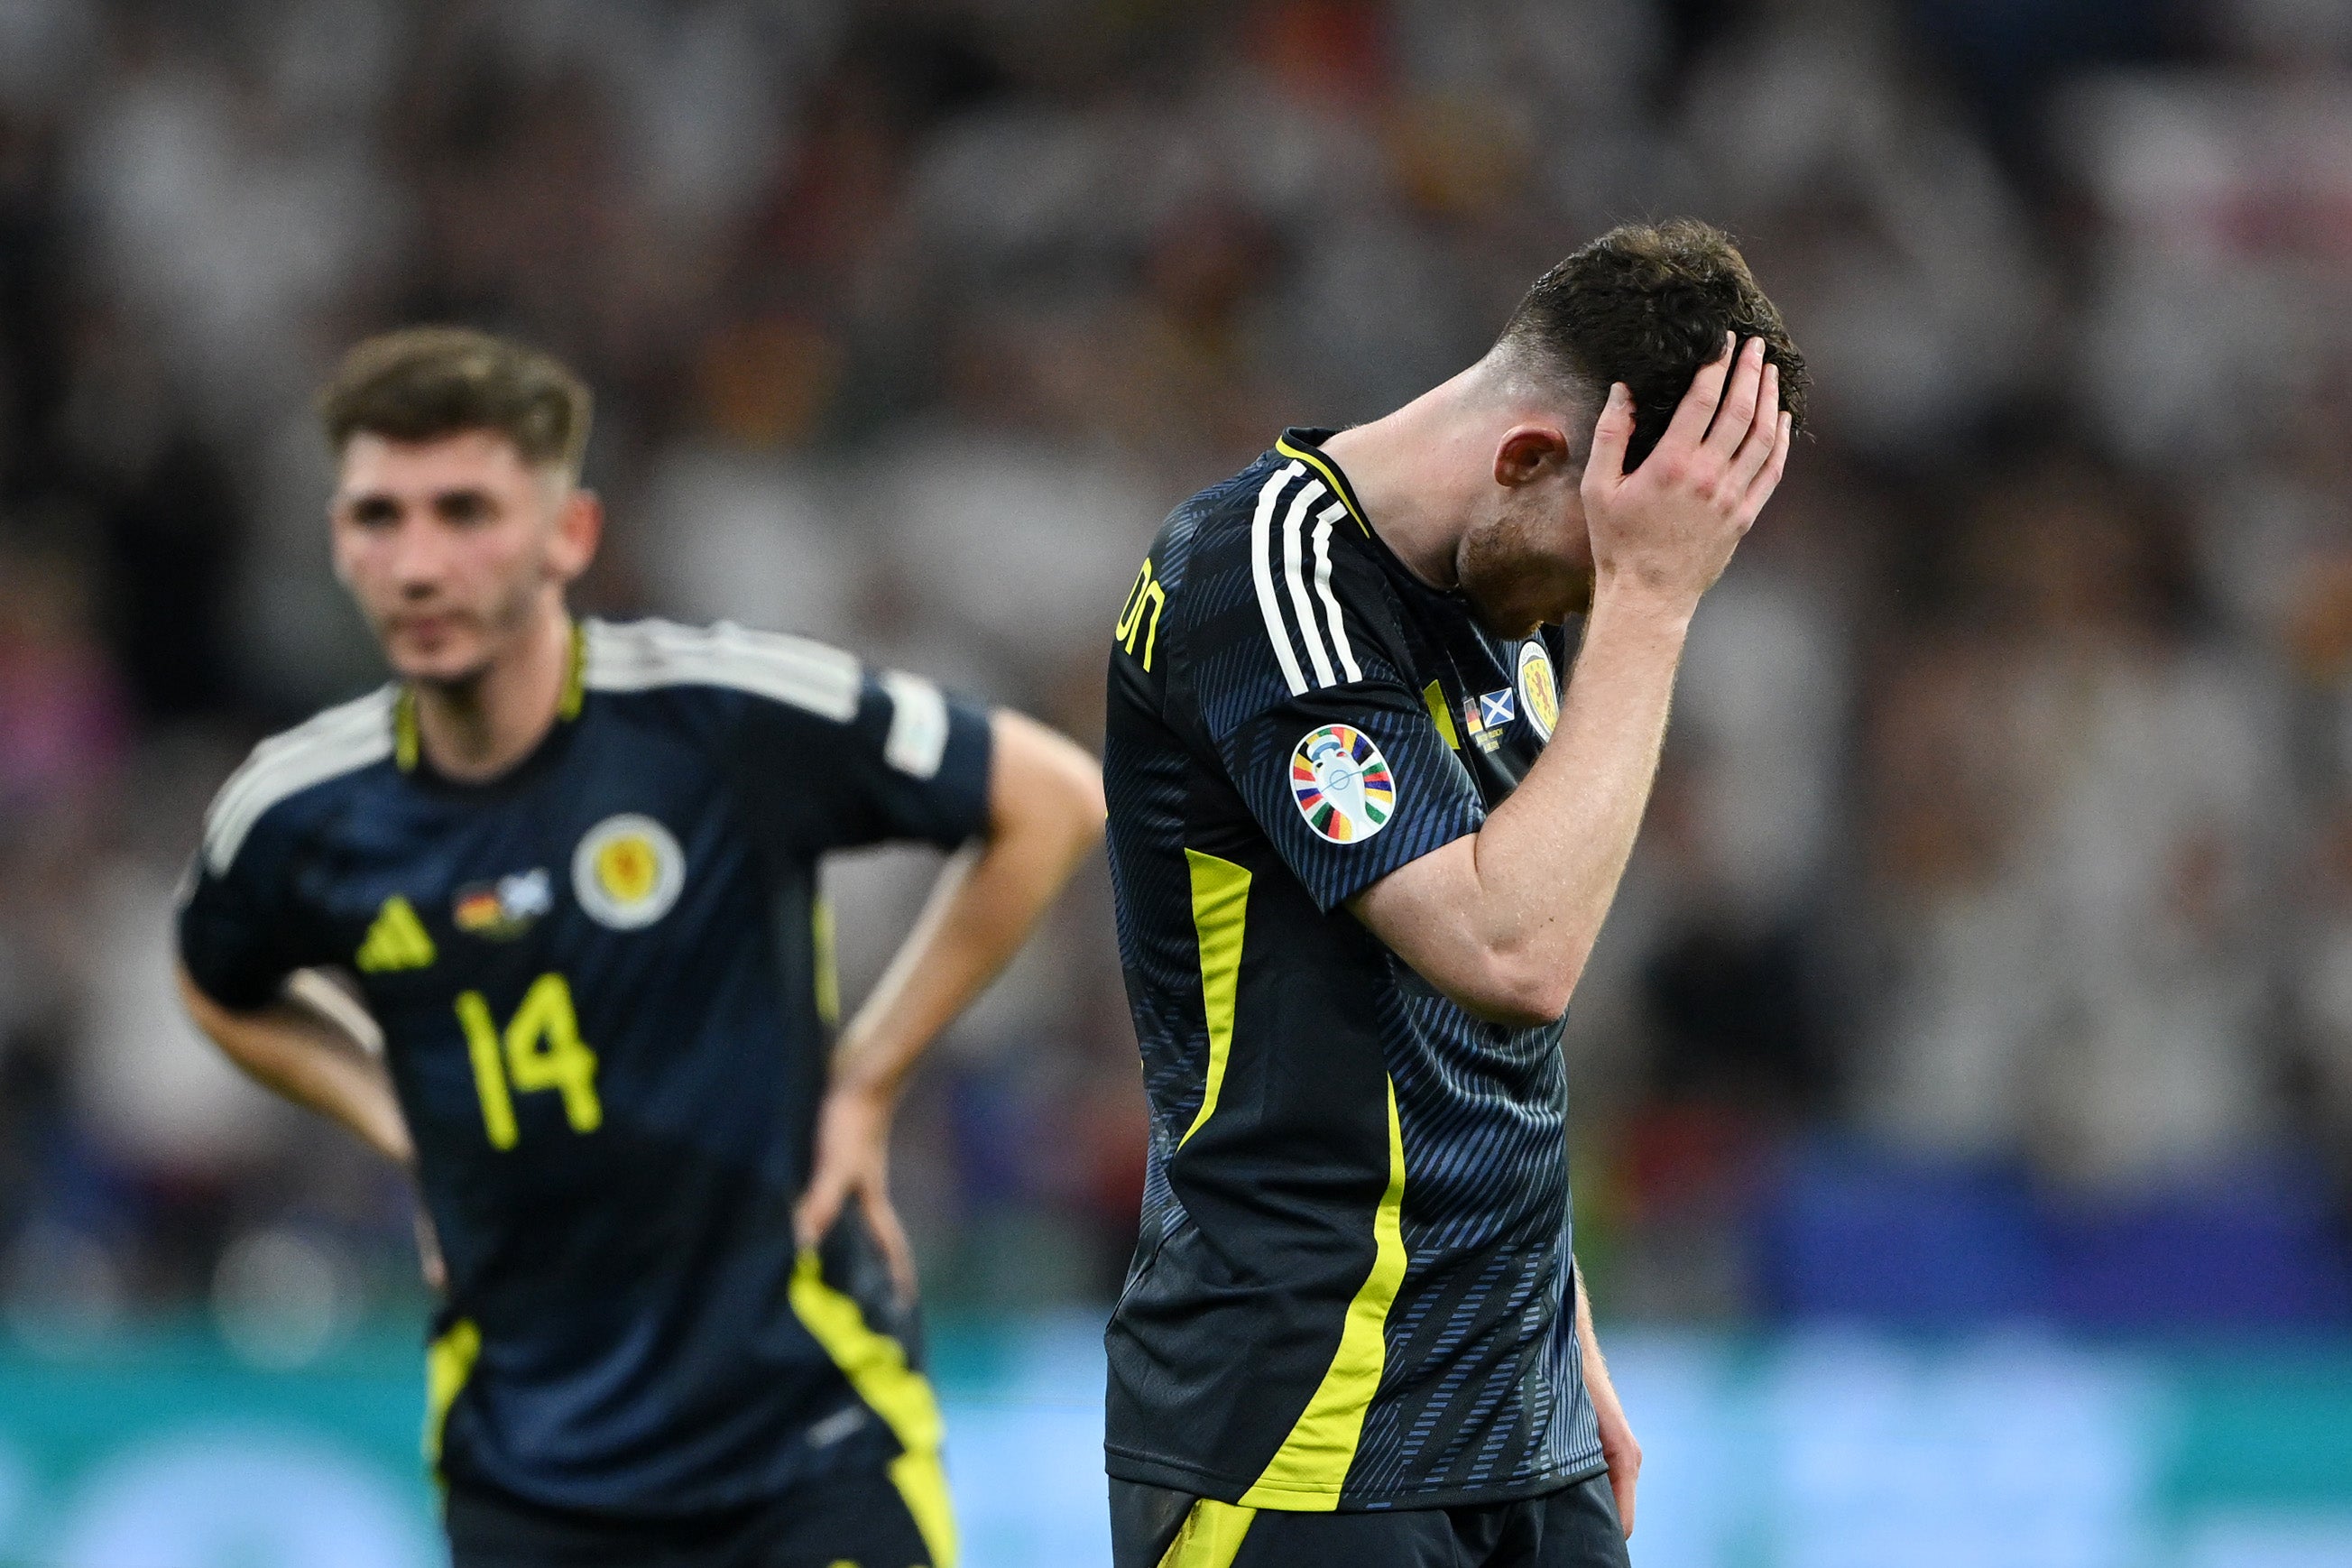 Scotland could not cope with Germany in Munich